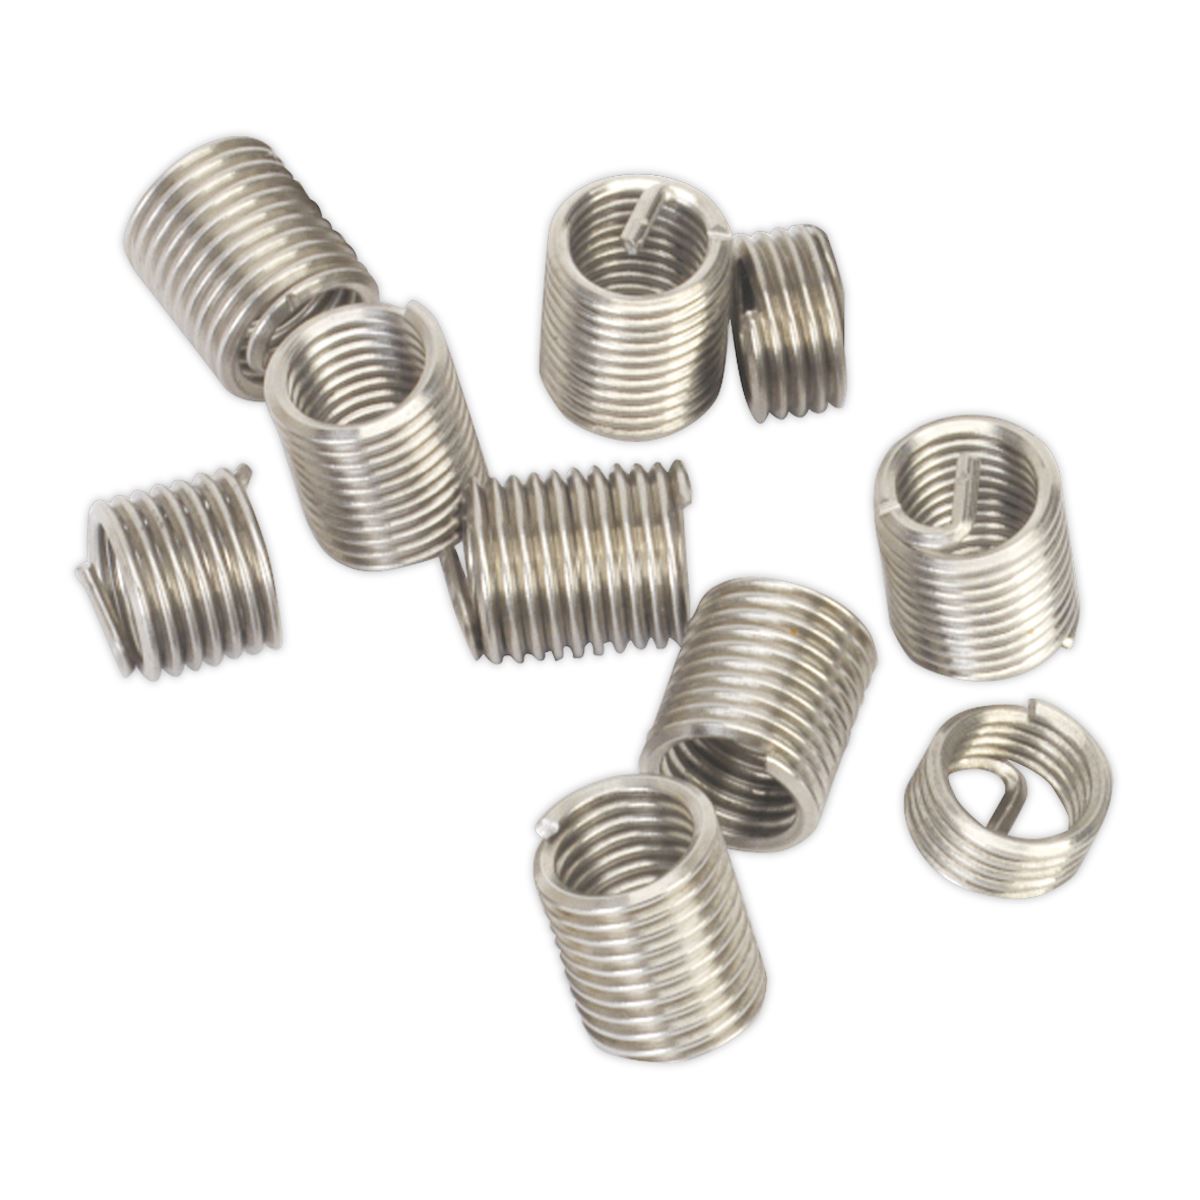 Sealey Thread Insert M9 x 1.25mm for TRM9 Threaded Inserts Helicoil 10 Pack